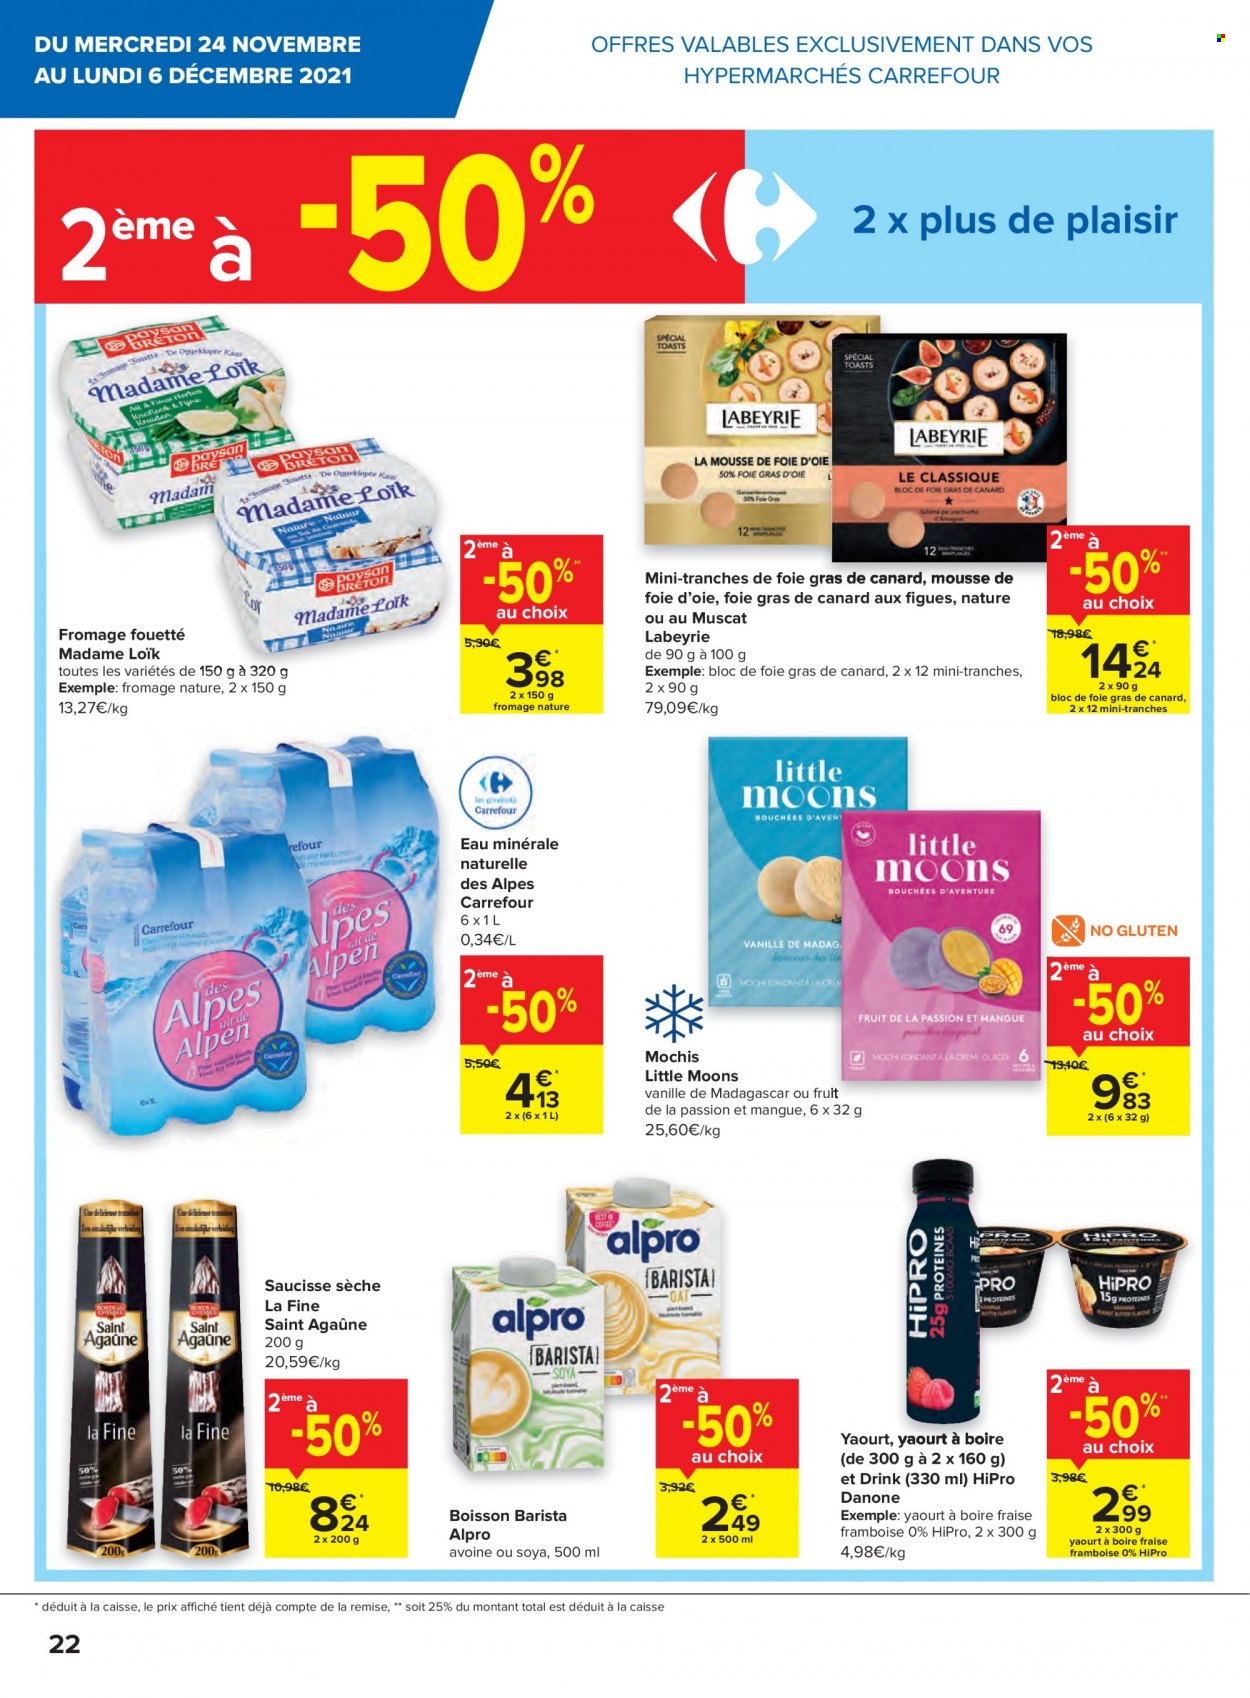 Catalogue Carrefour hypermarkt - 24.11.2021 - 6.12.2021. Page 22.